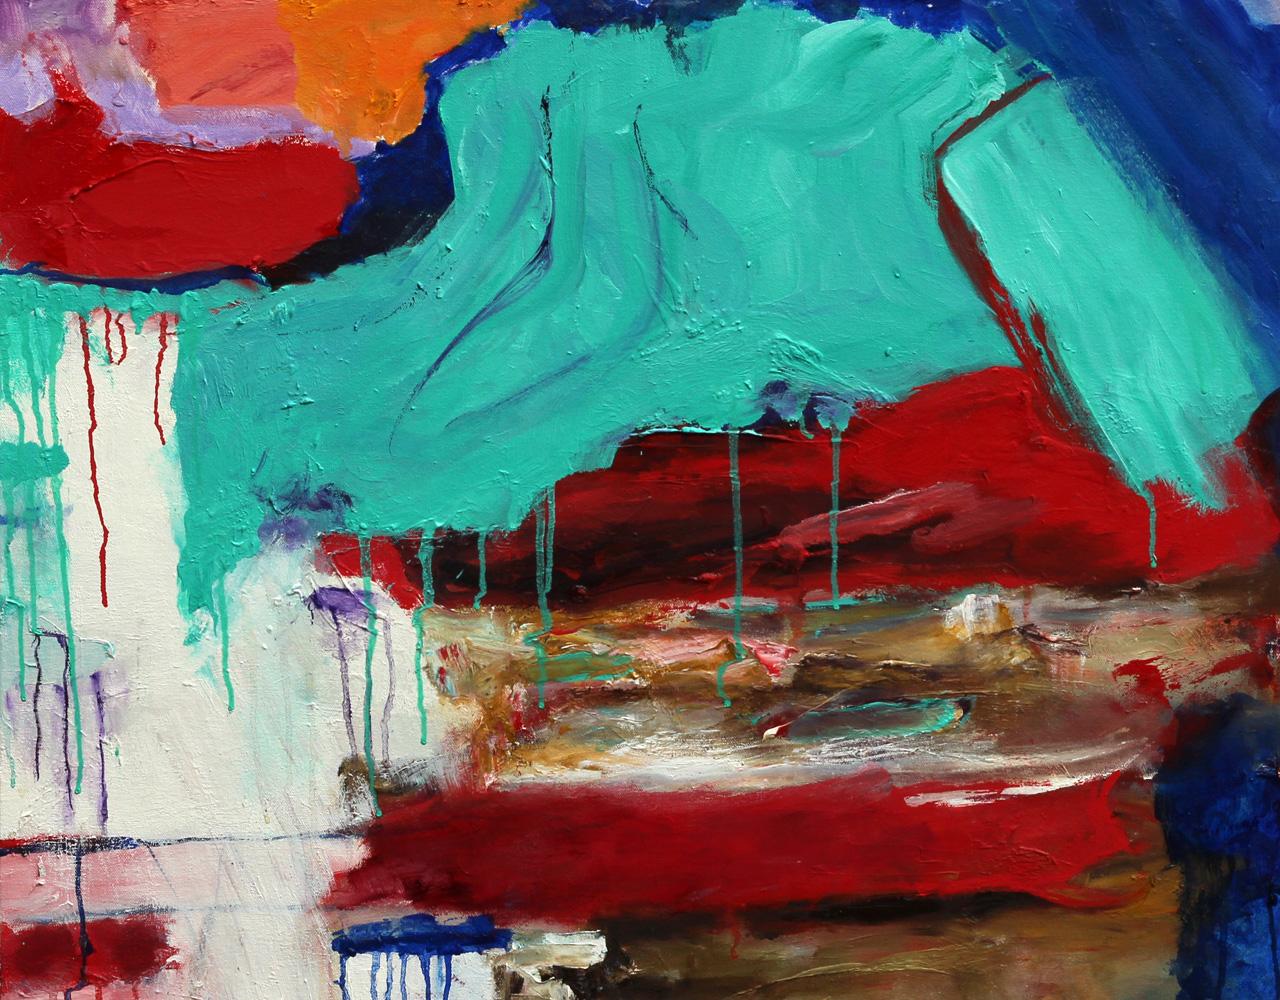 Katherine Borkowski-Byrne Abstract Painting - "New Horizons", abstract, expressionist, red, blue, white, oil painting